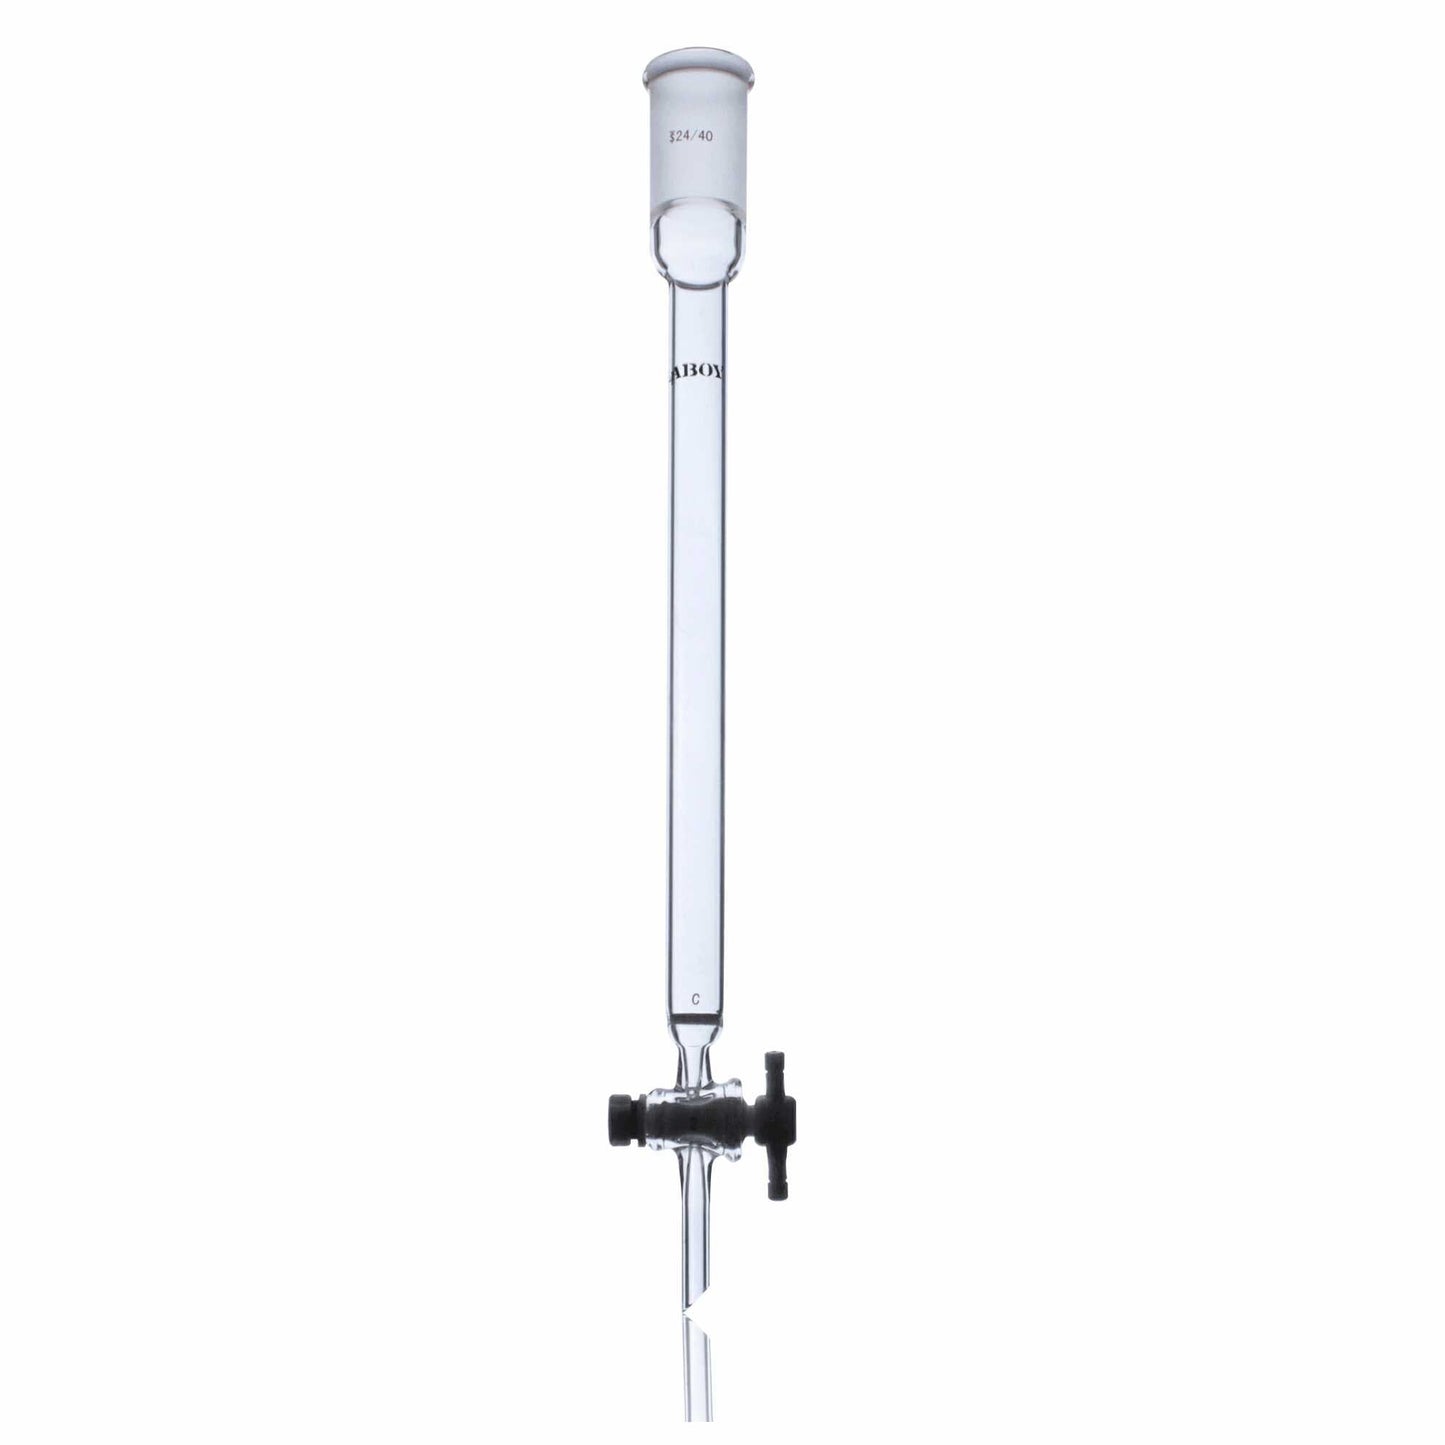 Glass Chromatography Column Fritted Disc With PTFE Stopcock and Taper Joint - Scienmart